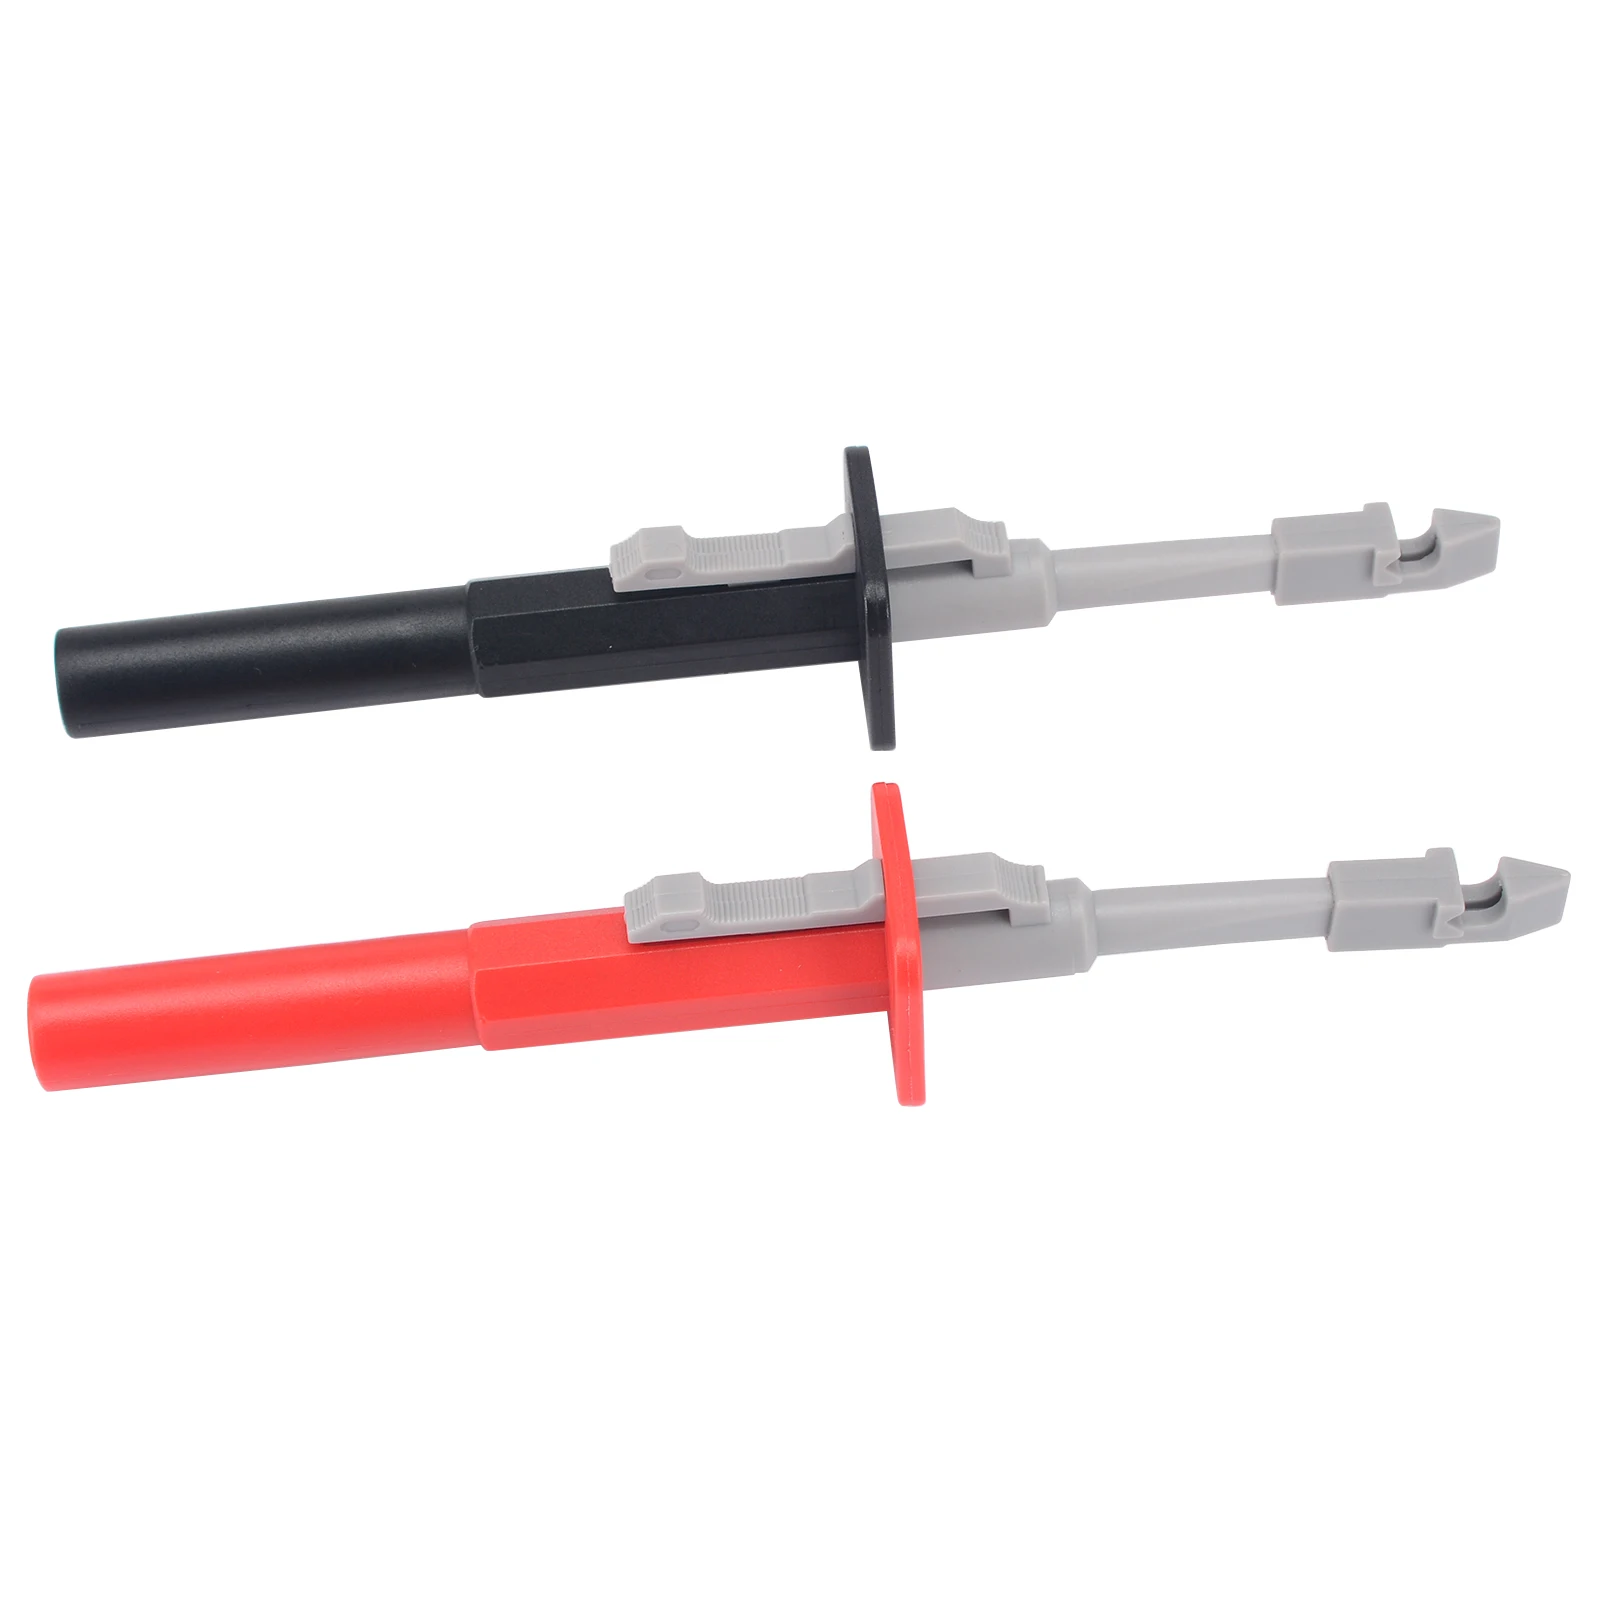 2Pcs Safety Test Clip Insulation Piercing Probes For Car Circuit Detection Kit 